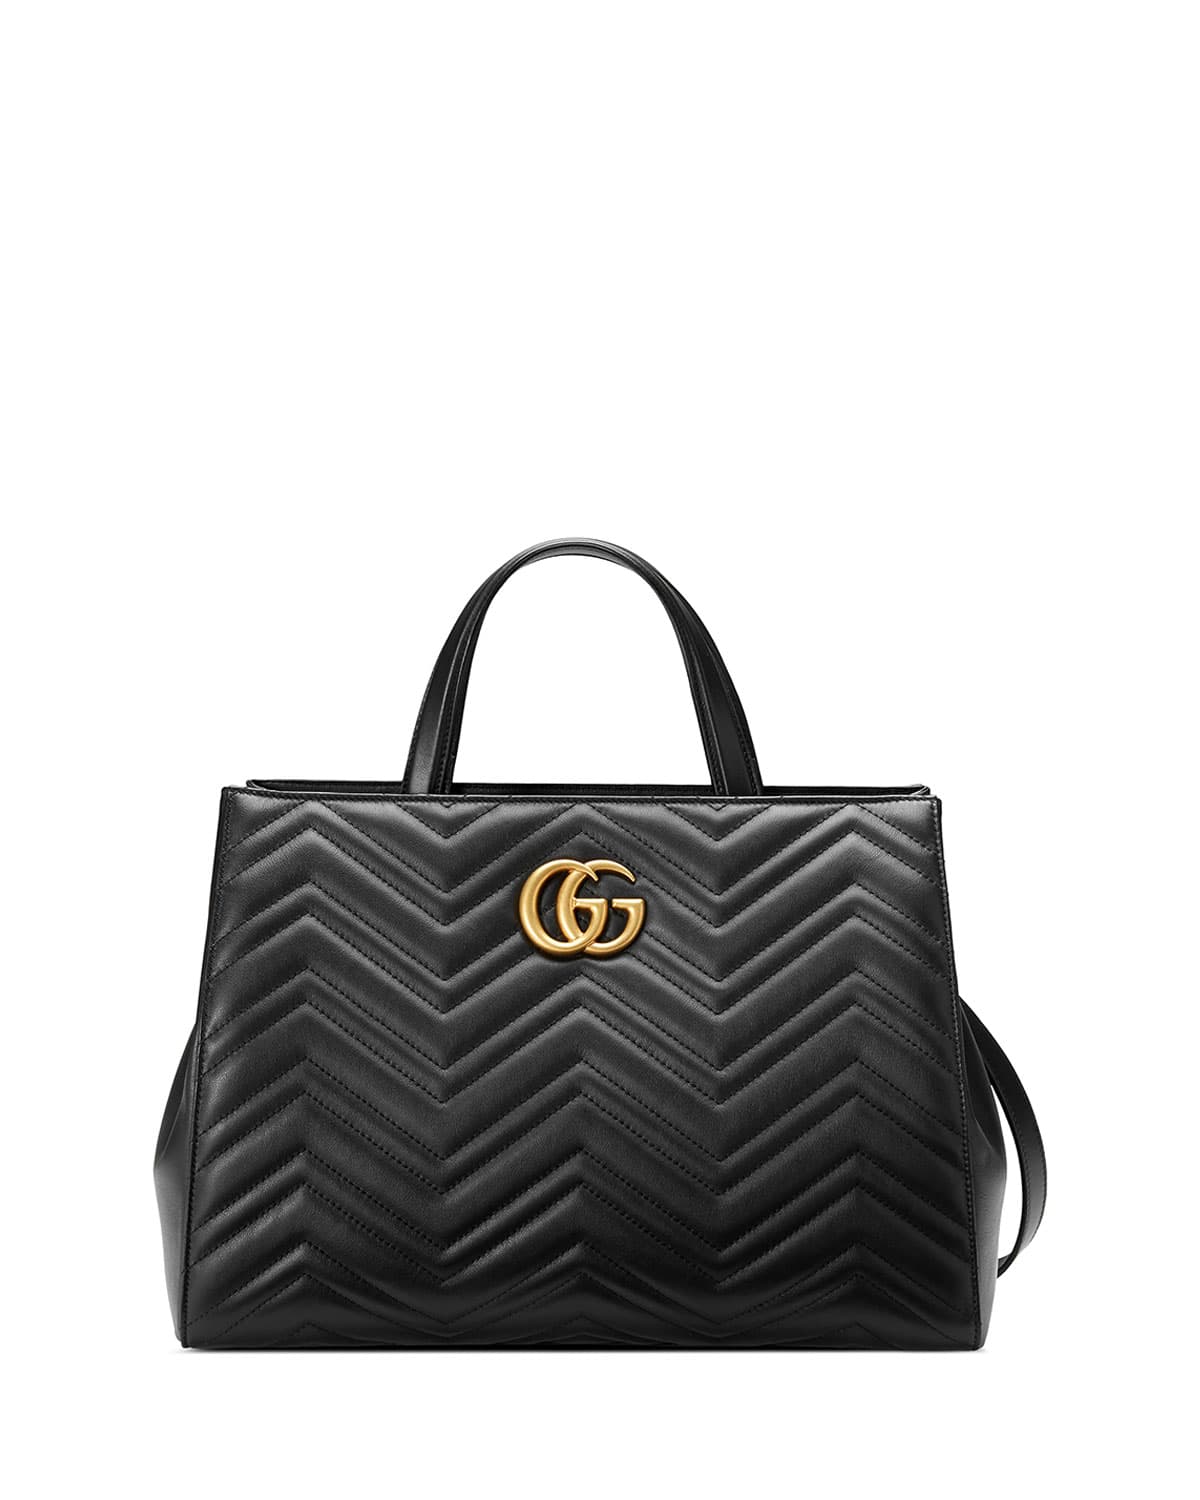 Europe Gucci Bag Price List Reference Guide – Page 2 – Spotted Fashion